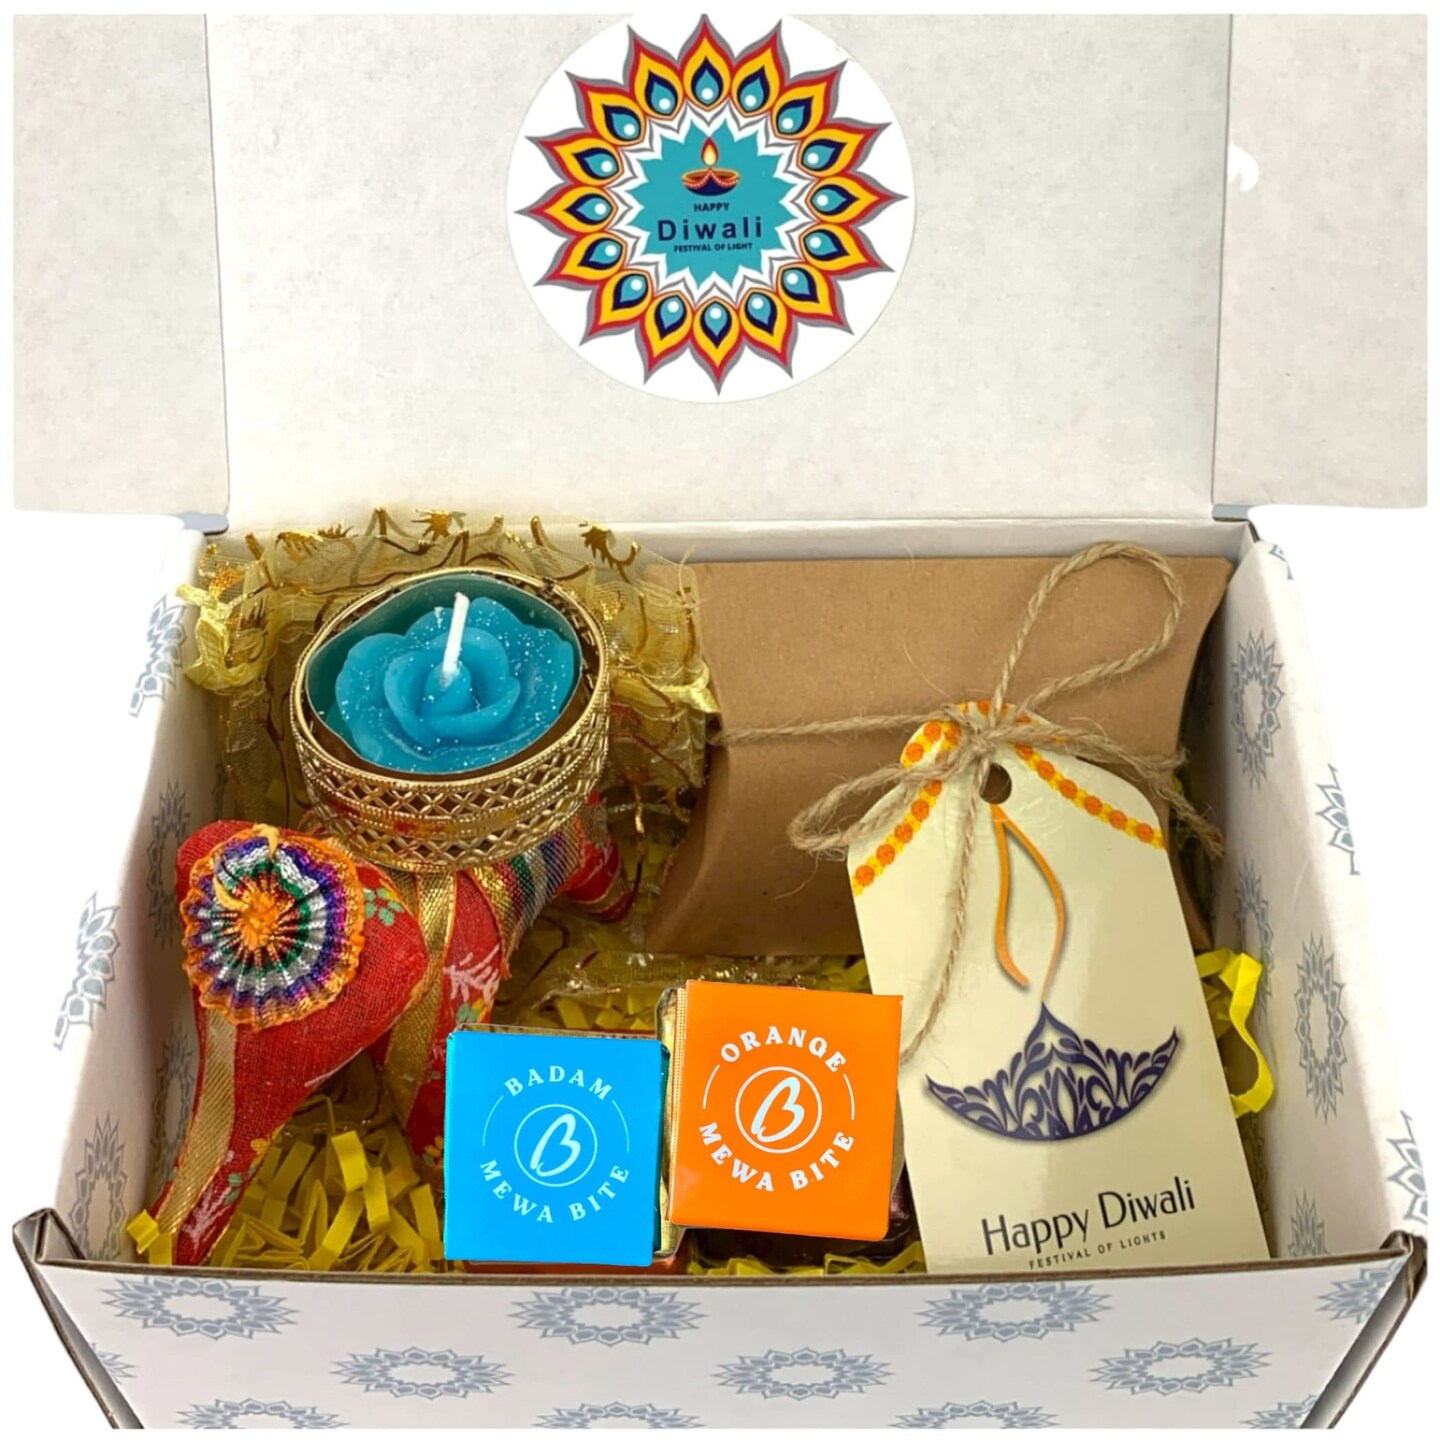 Diwali Gift Guide 2021: Where to Buy The Best Diwali Gifts and Gift Hampers  in Singapore | Vanilla Luxury